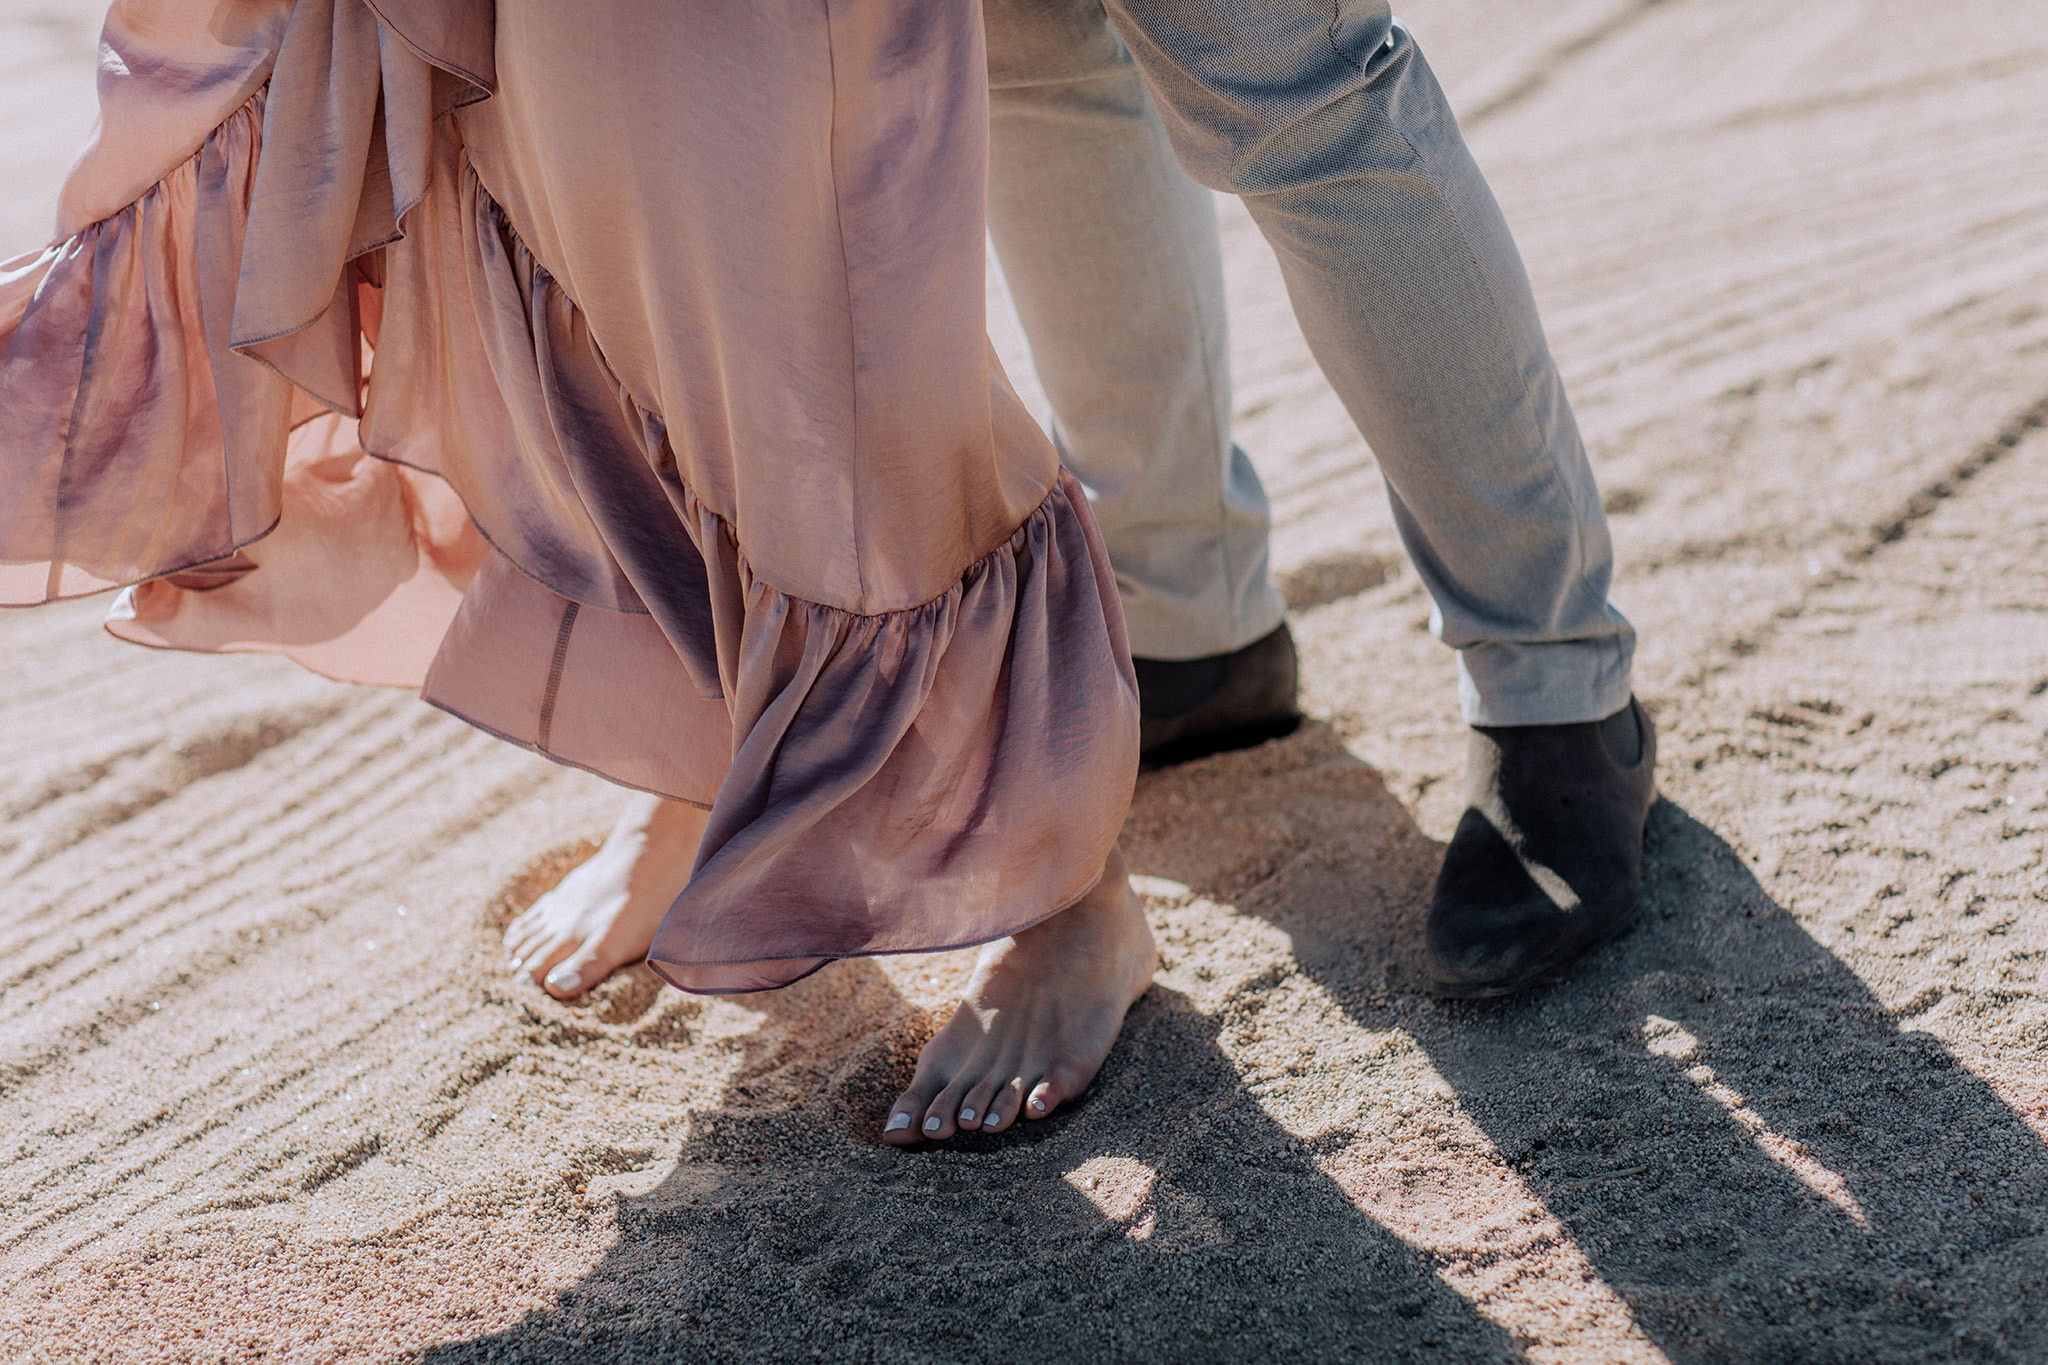 The engaged couple's feet on the sand. Engagement image by Jenny Fu Studio